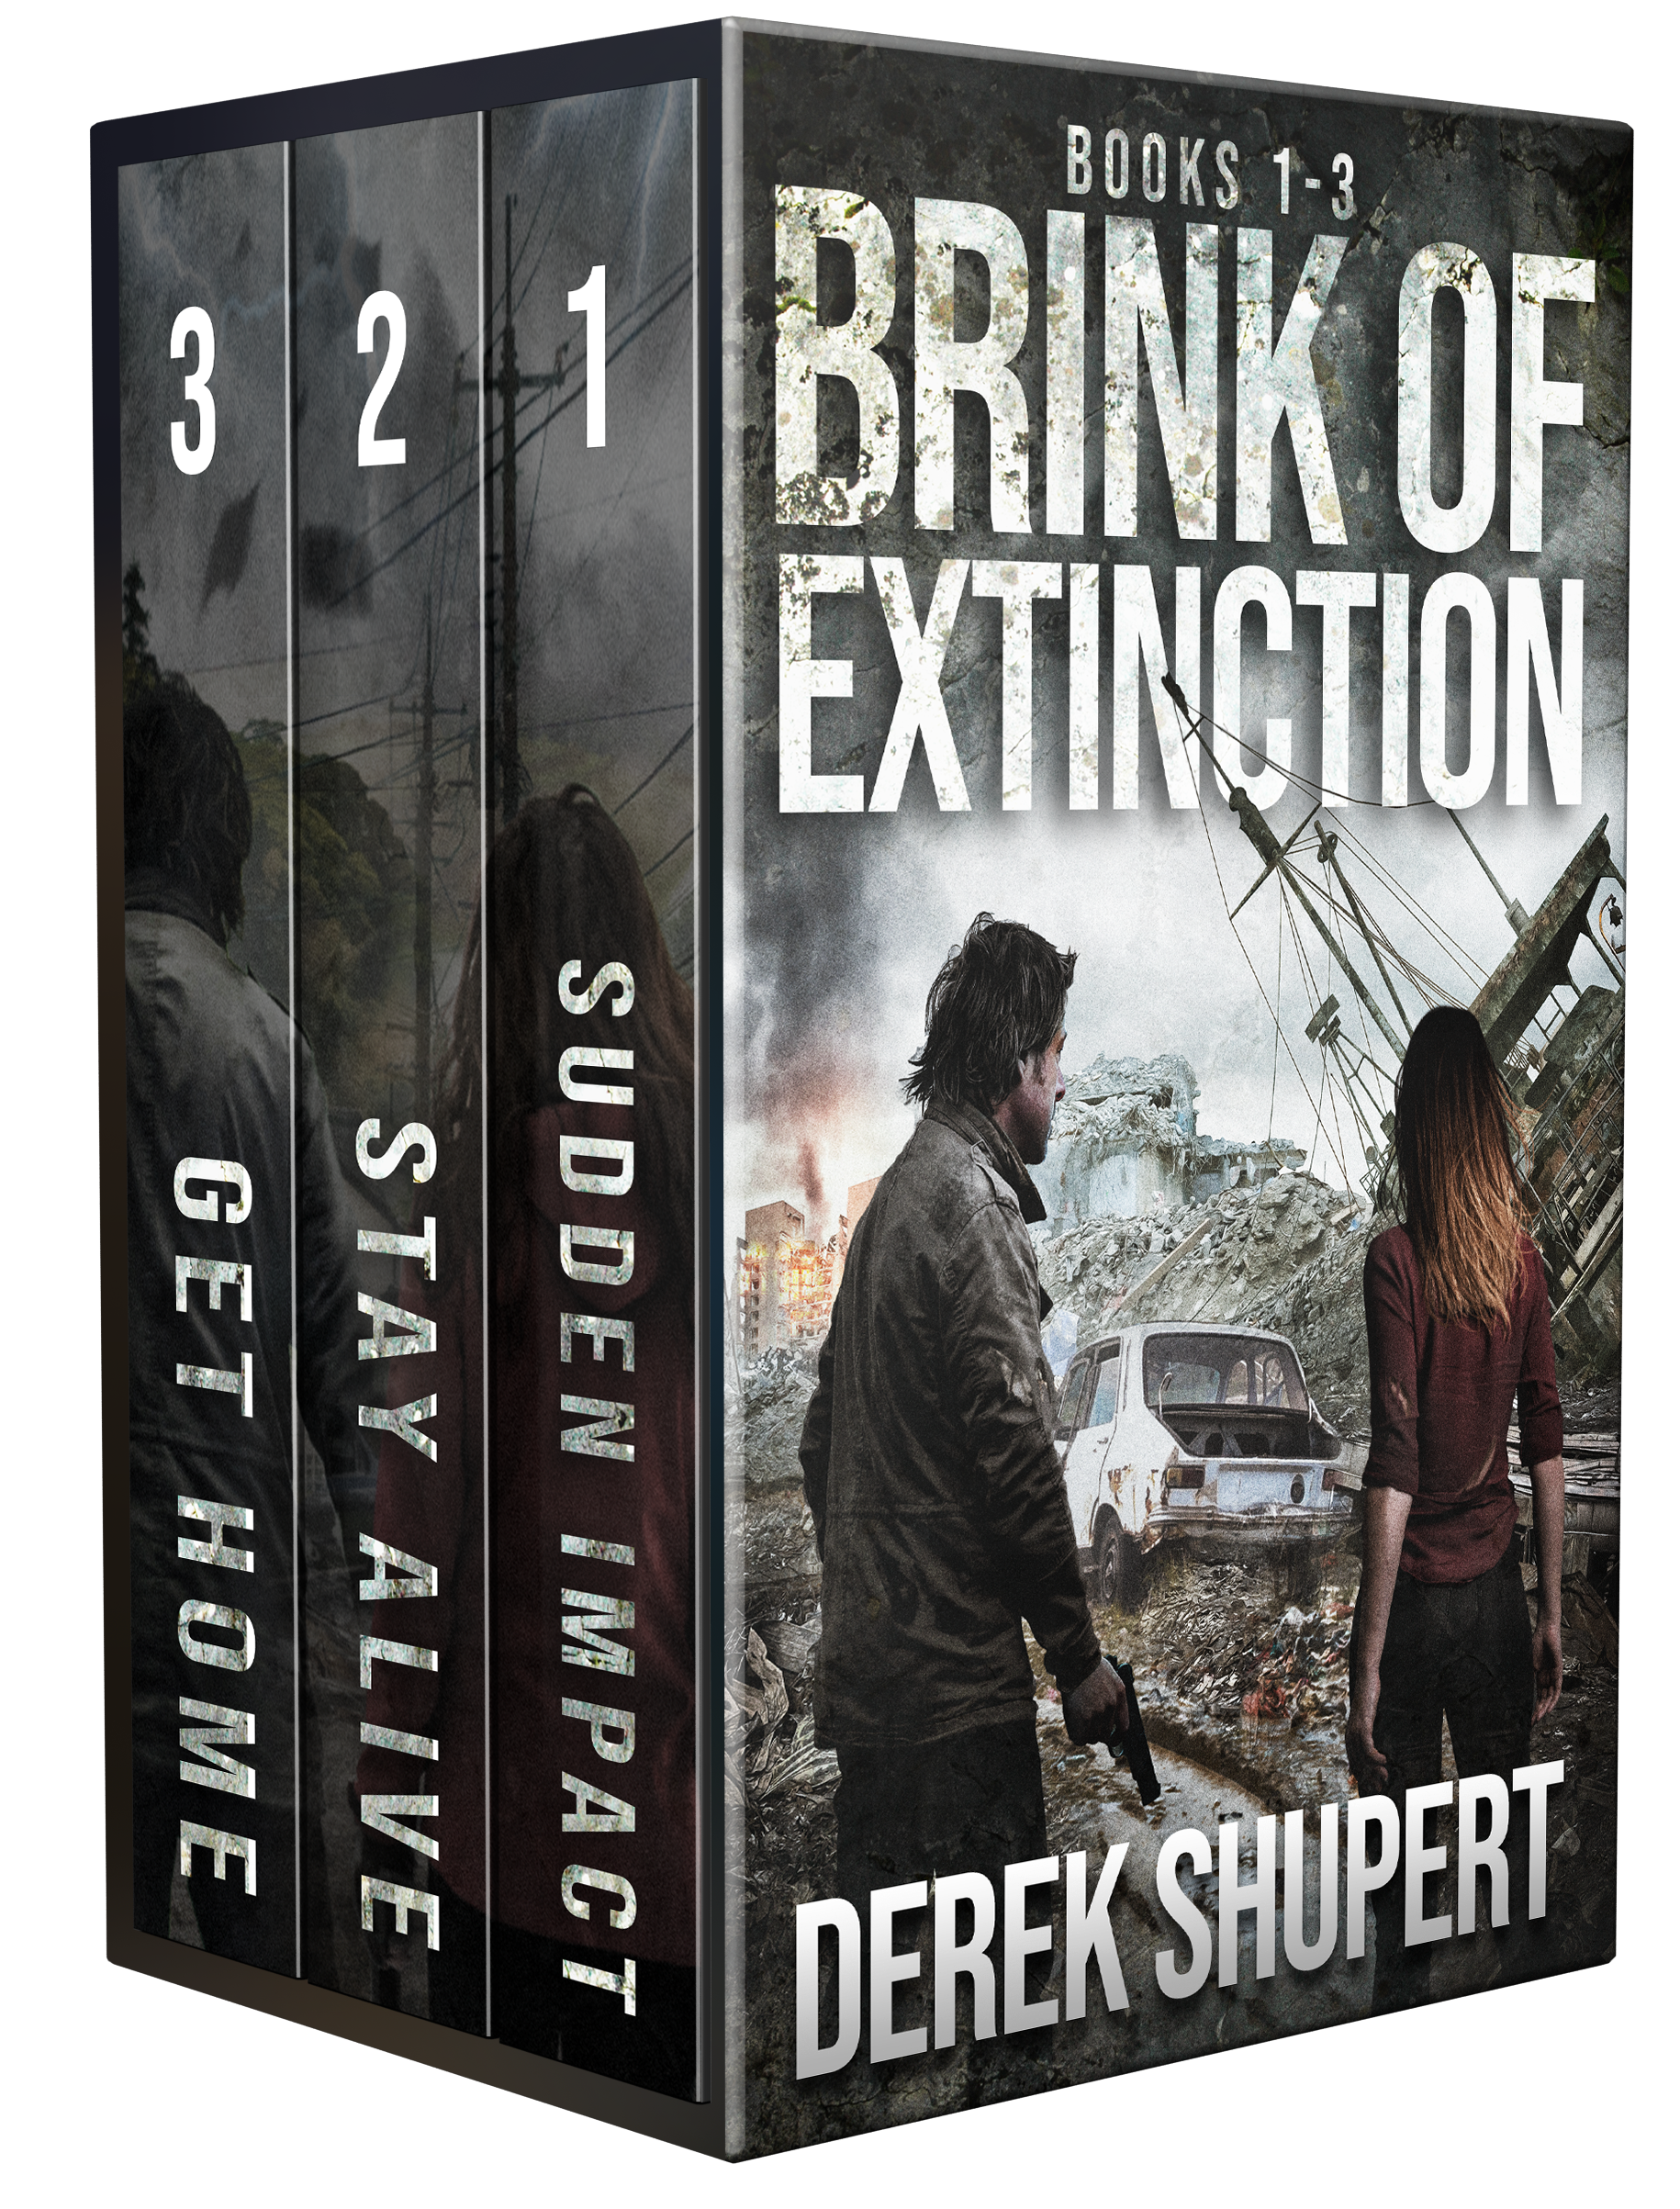 the complete brink of extinction series boxset